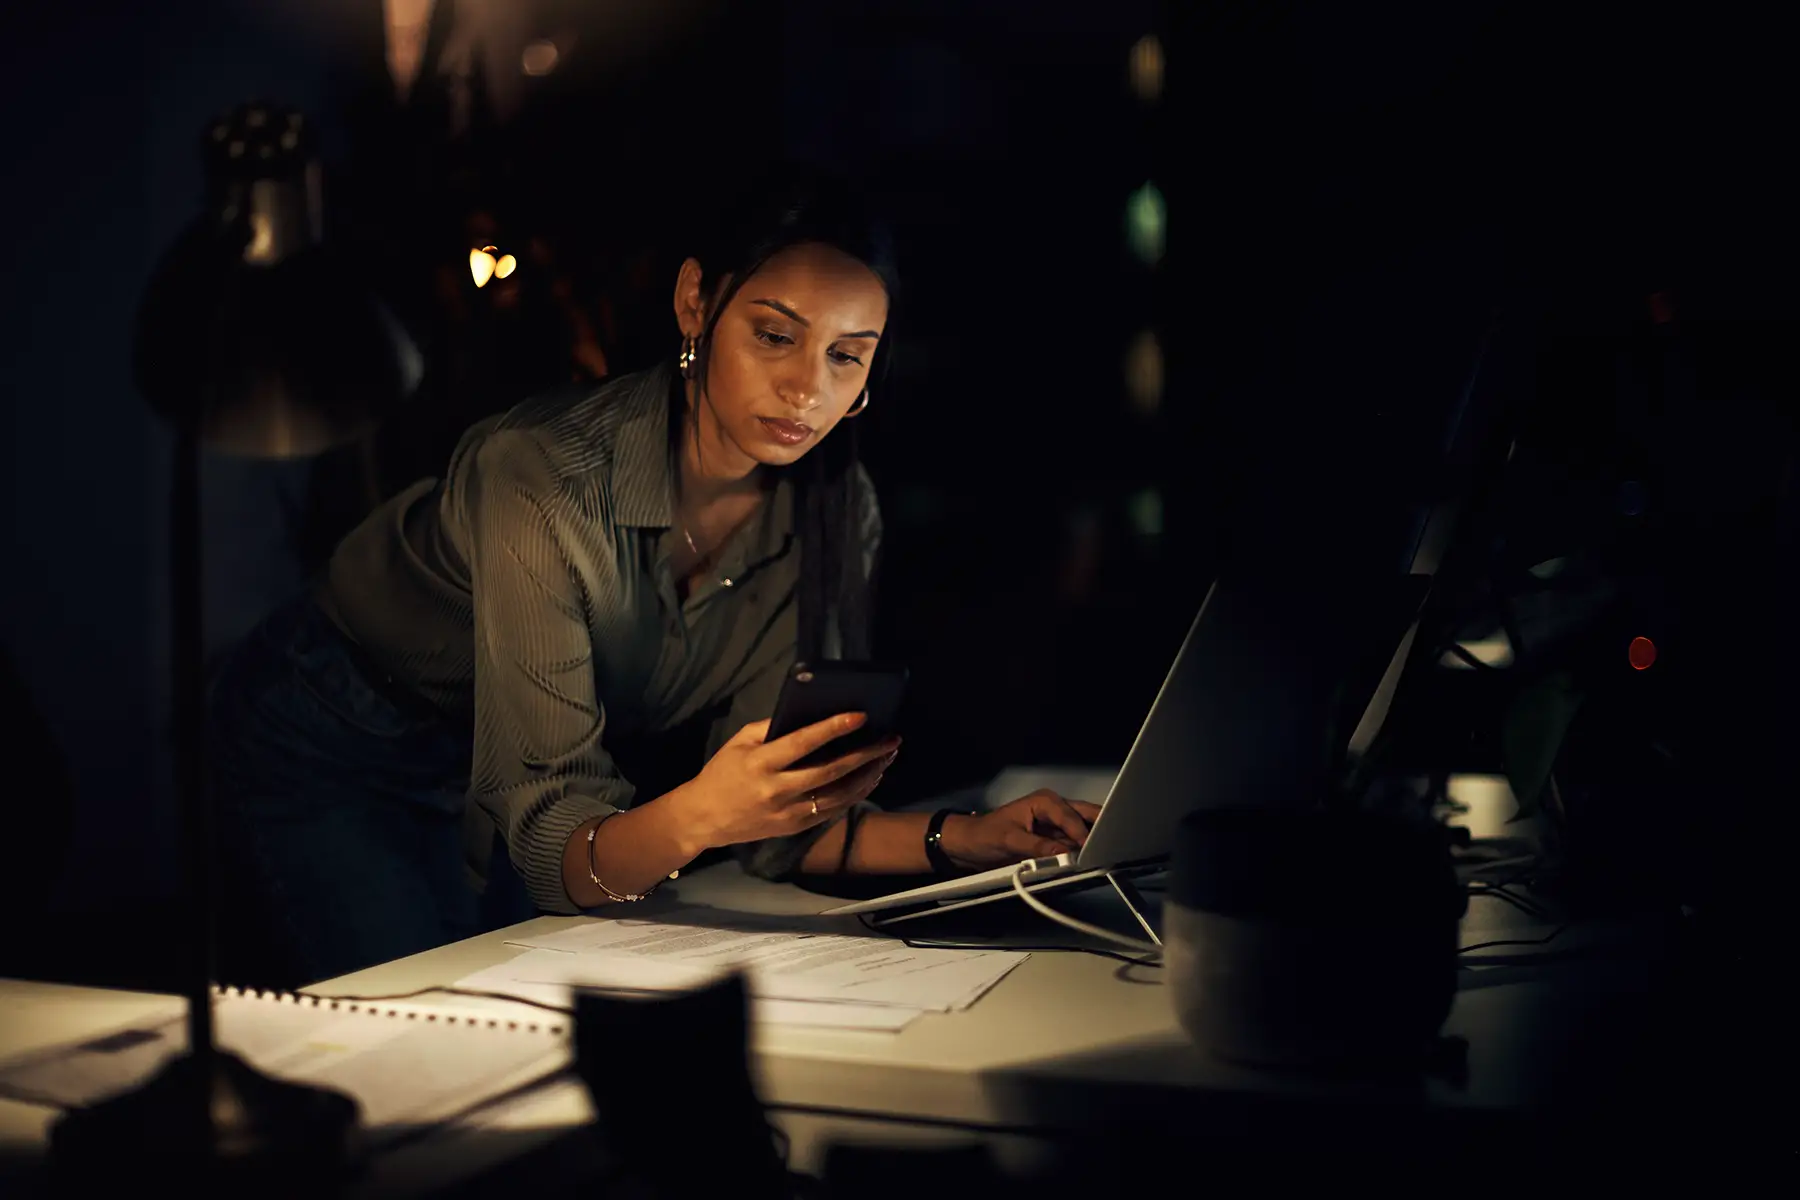 Woman working late, only lit by the desk lamp and the light from her laptop and phone, she looks irritated.